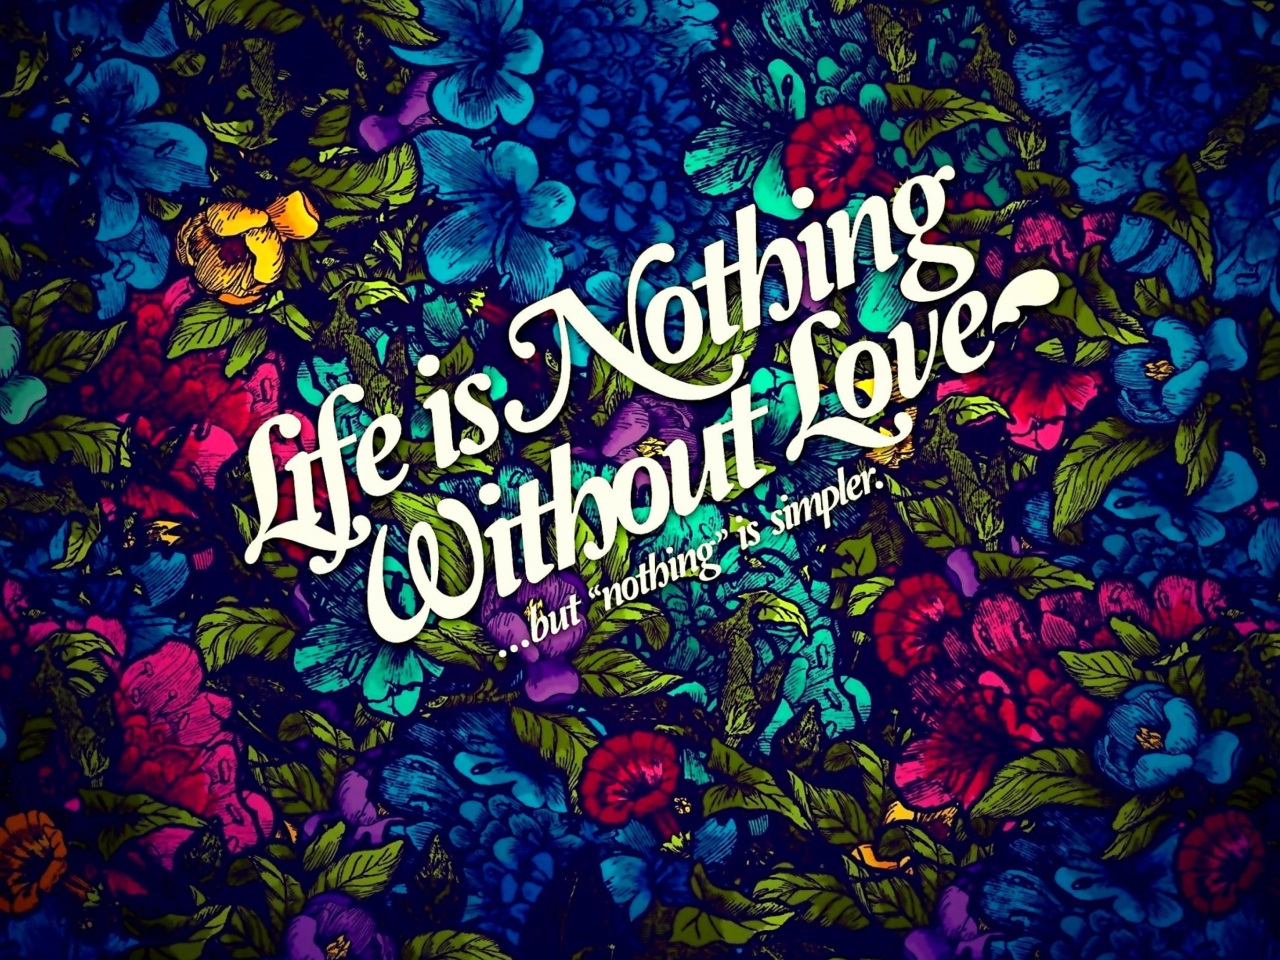 Life Is Nothing wallpaper 1280x960